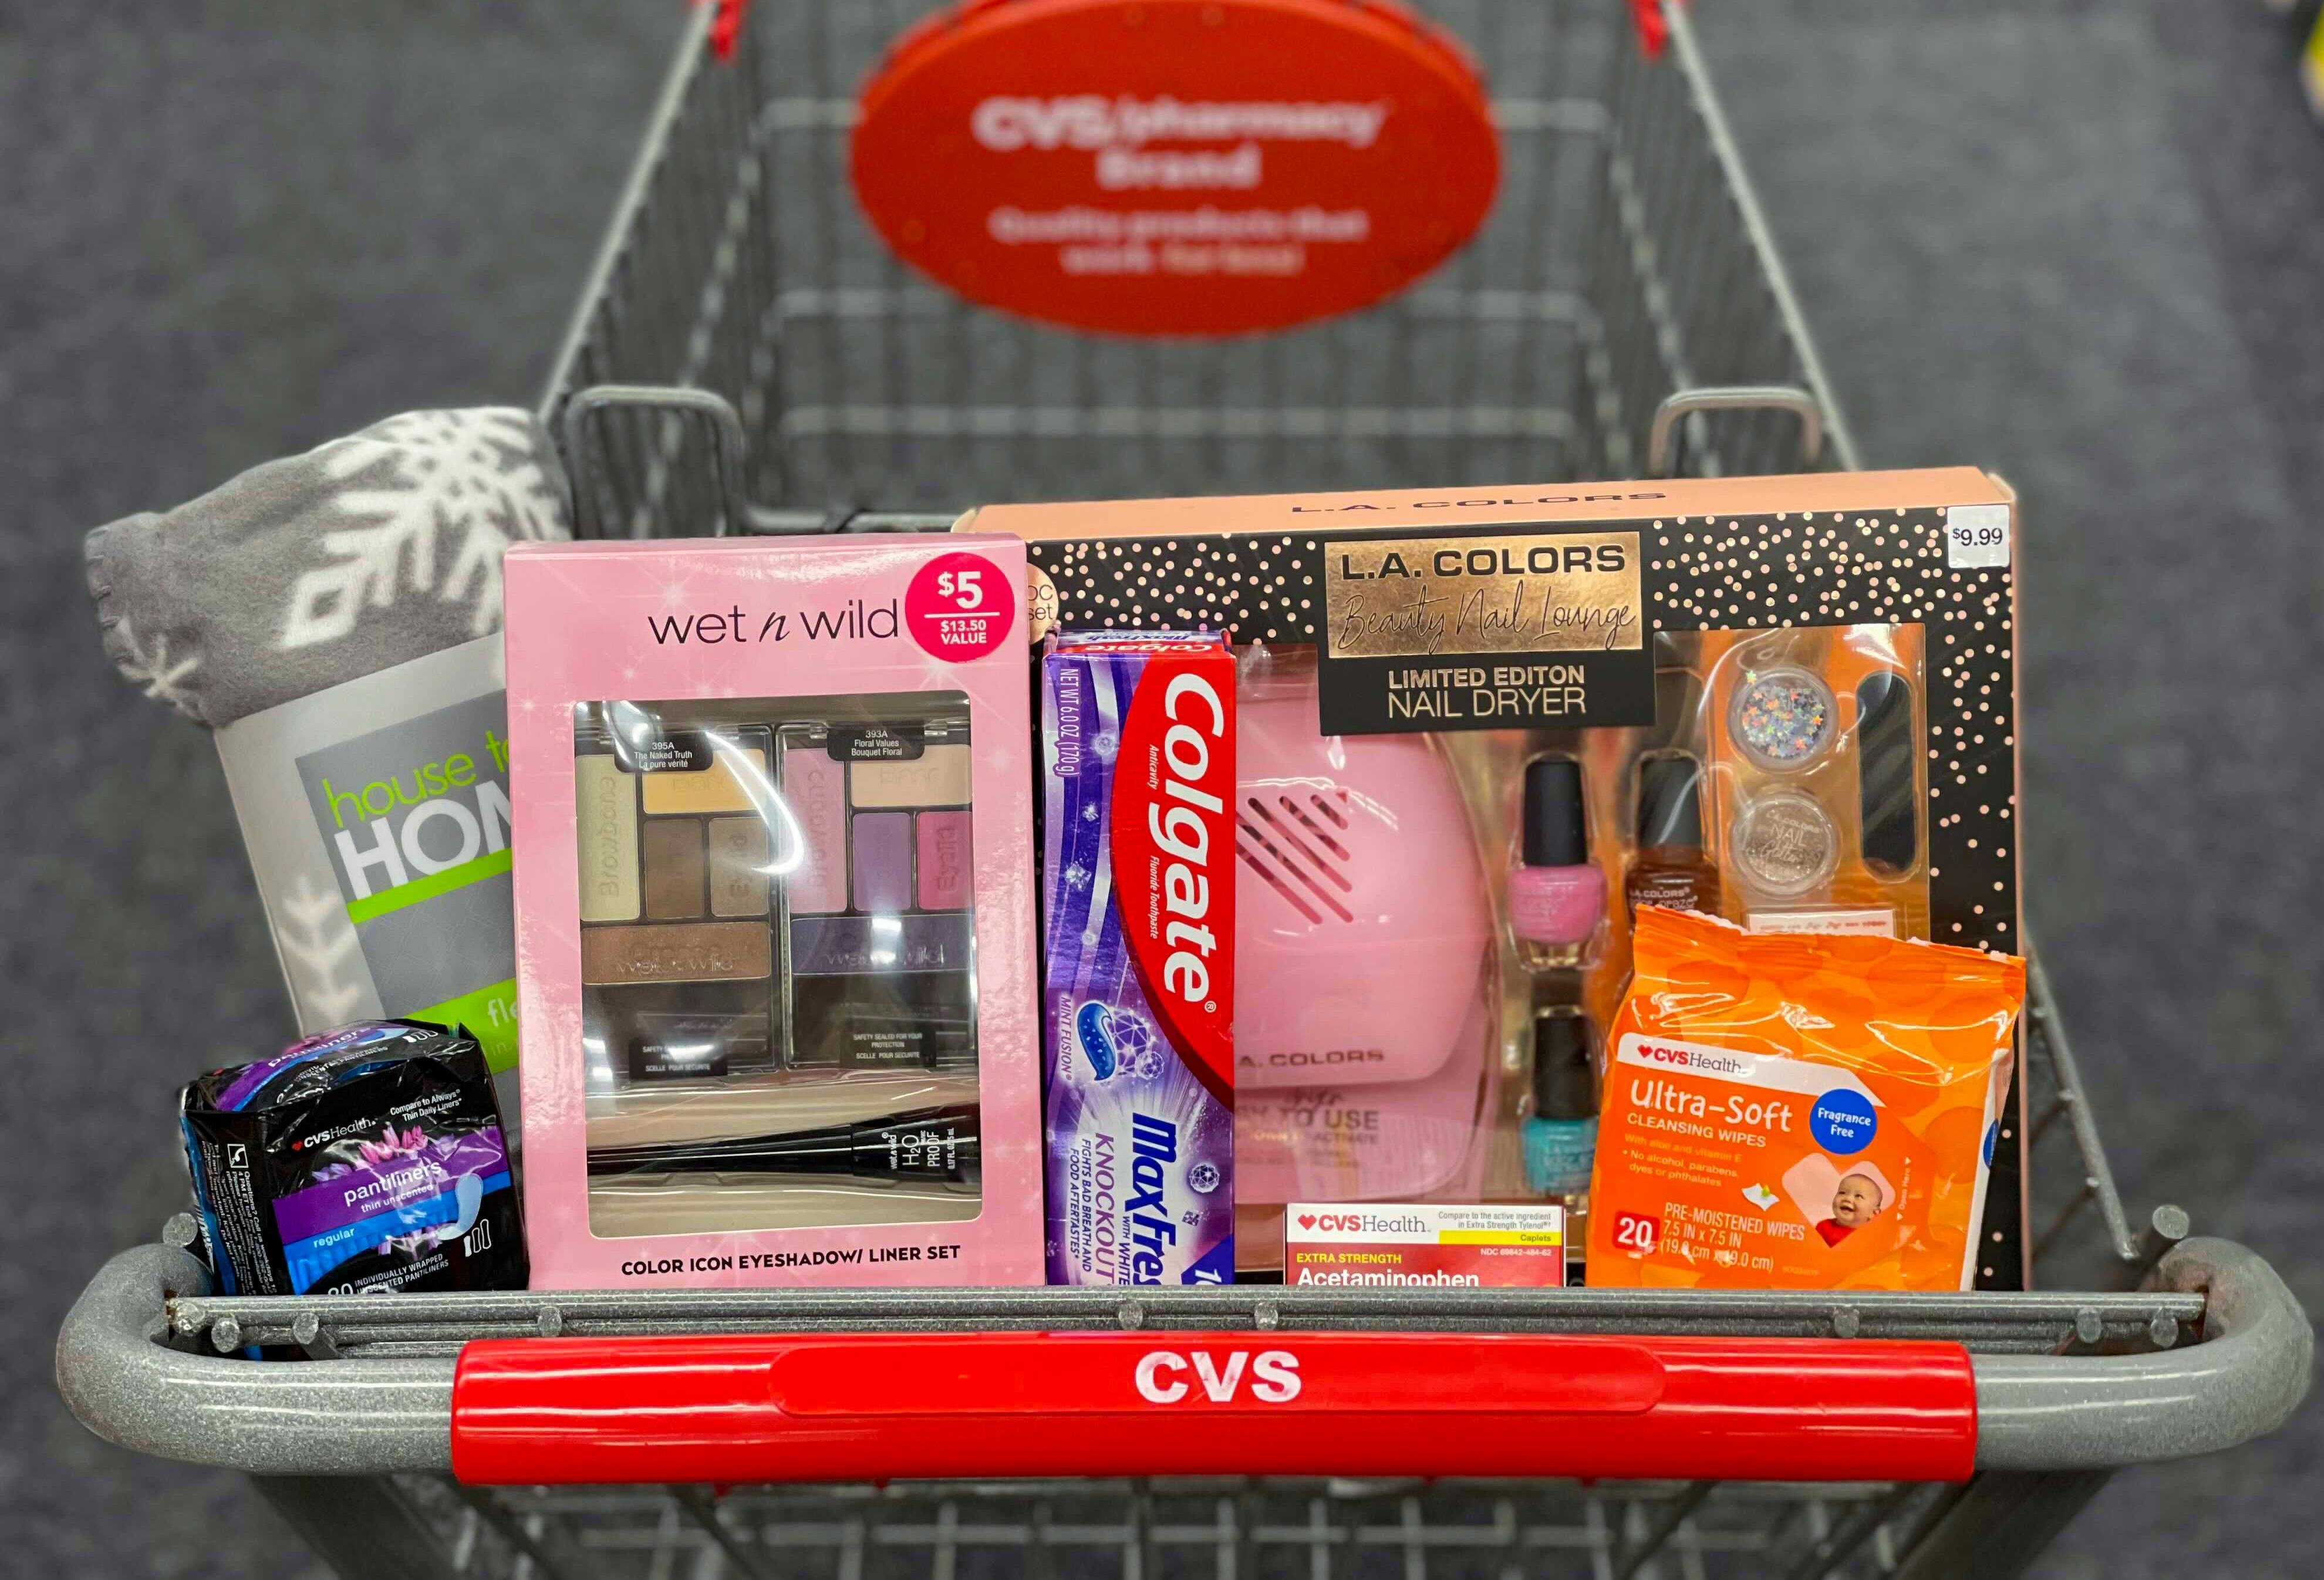 Beauty and personal care items in the basket of a CVS shopping cart.